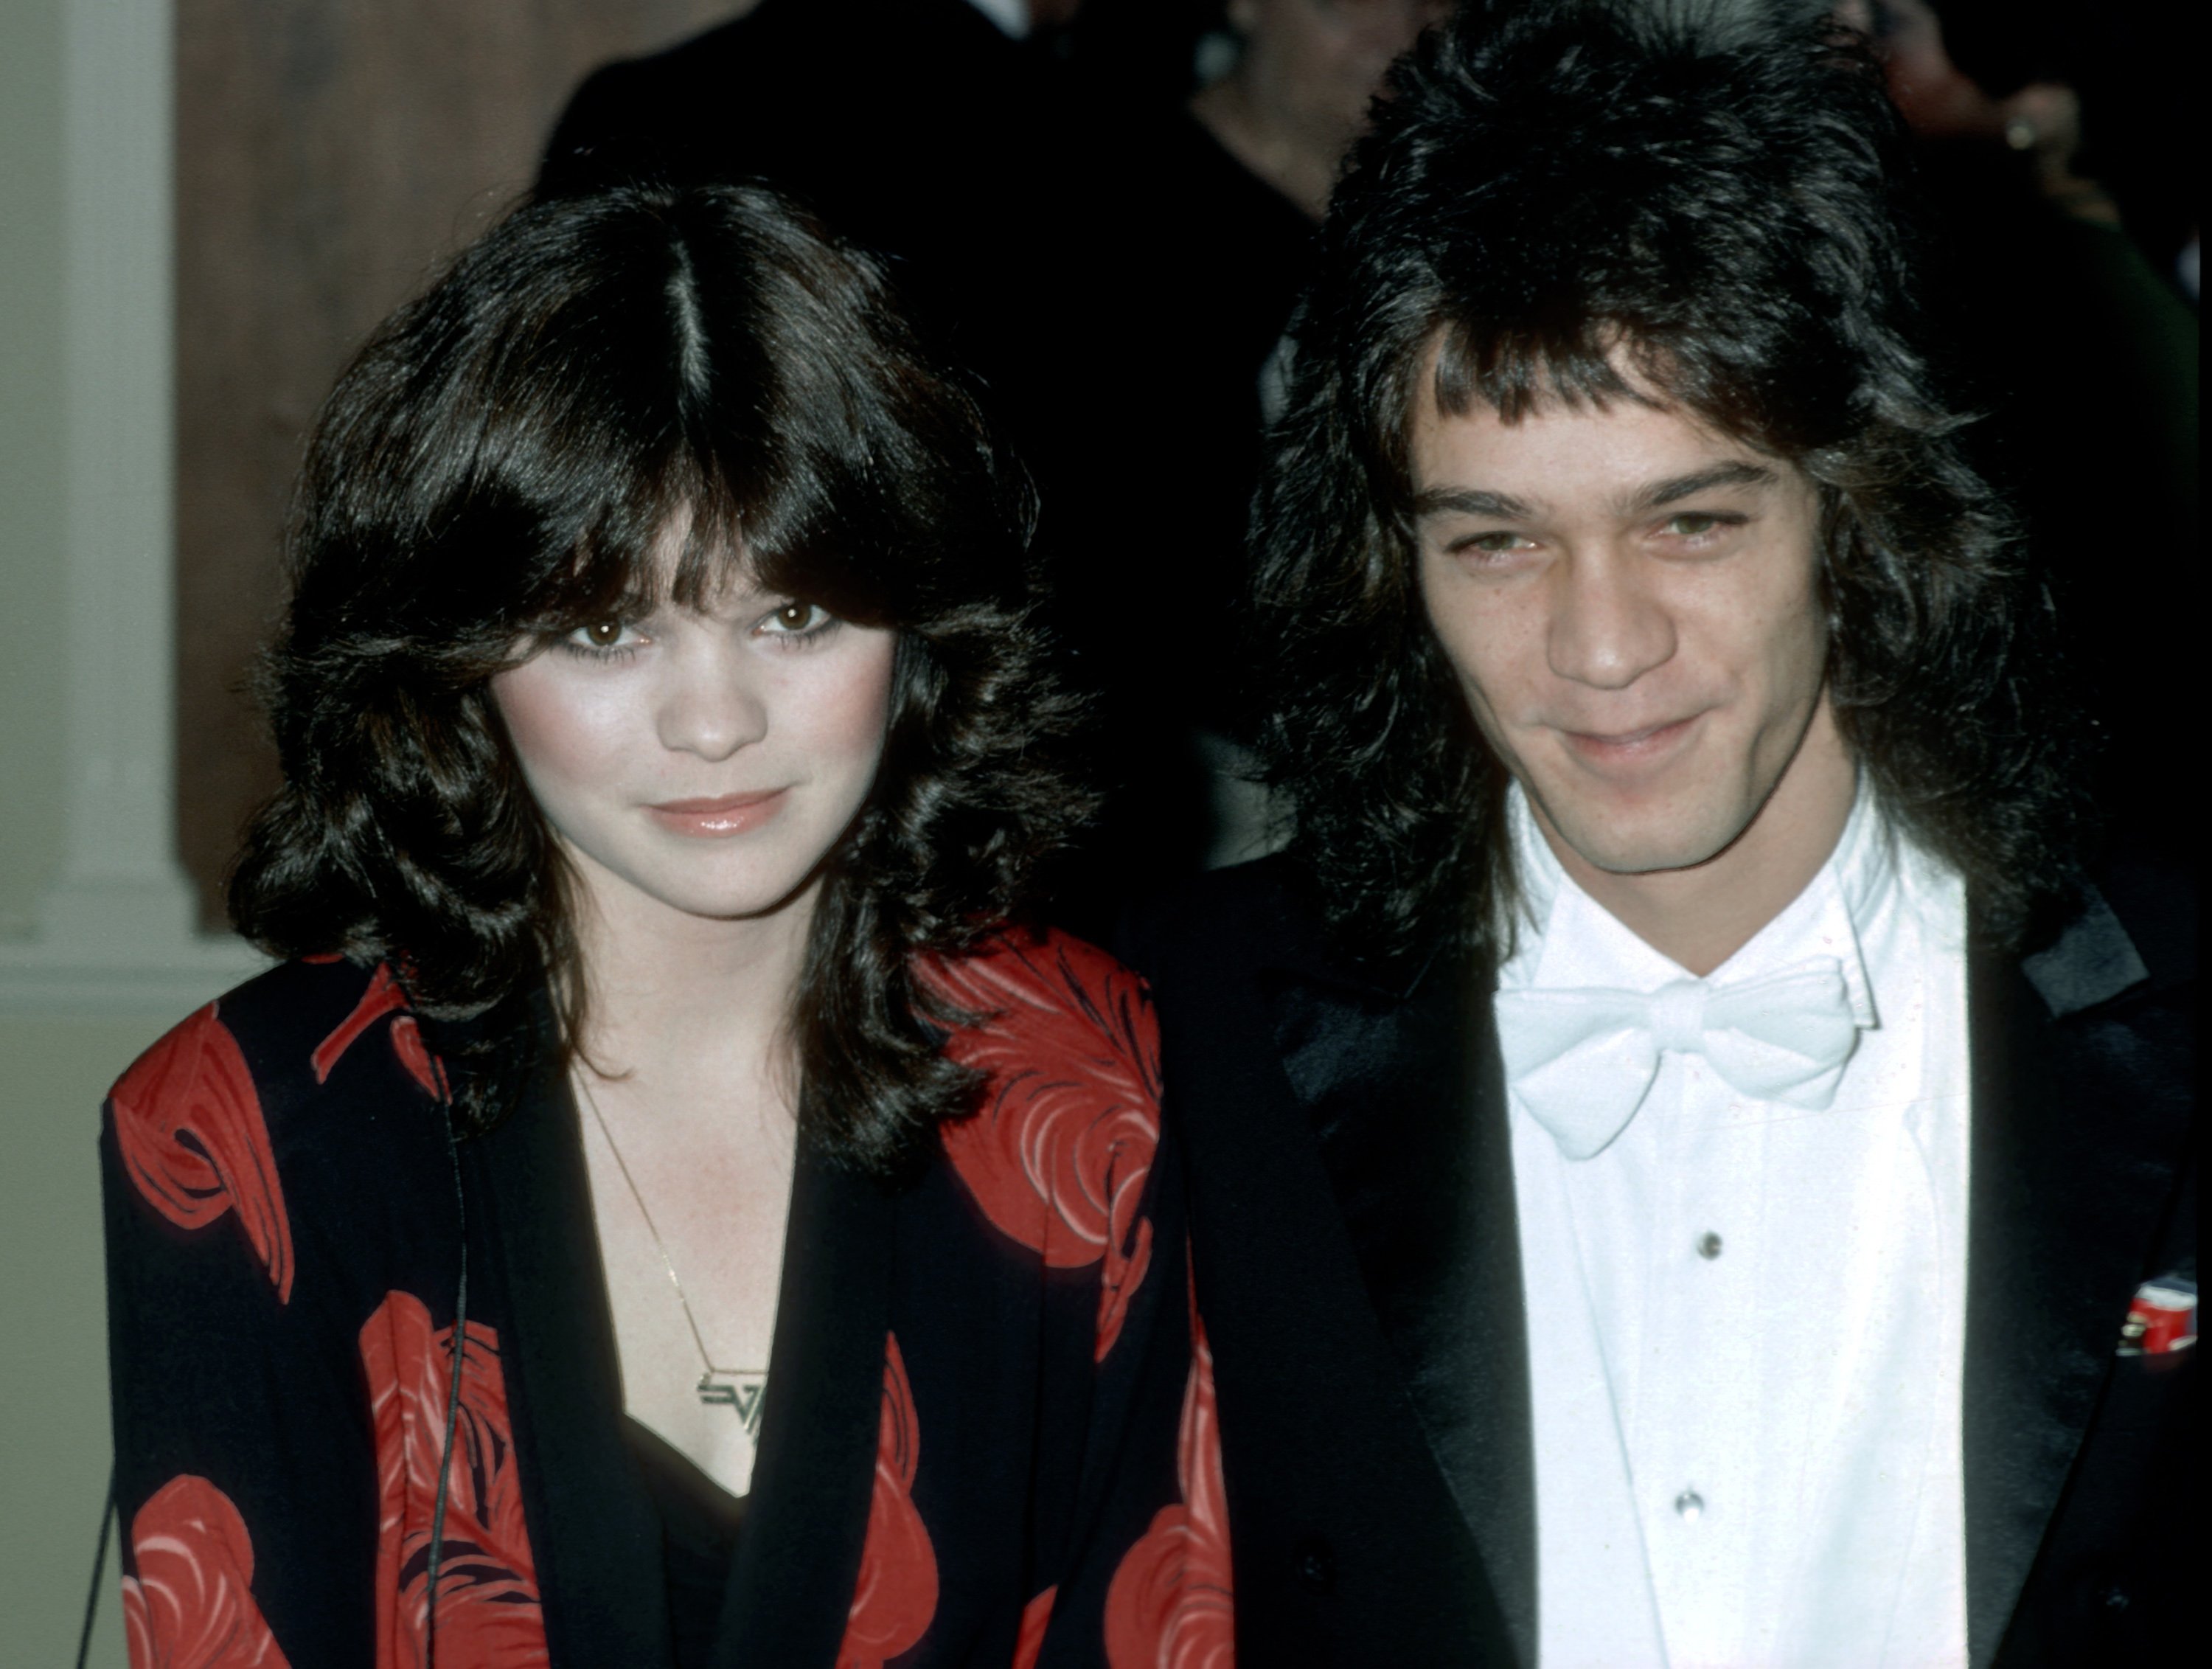 Valerie Bertinelli and Eddie Van Halen during 38th Annual Golden Globe Awards at Beverly Hilton Hotel in Beverly Hills, California, United States. | Source: Getty Images